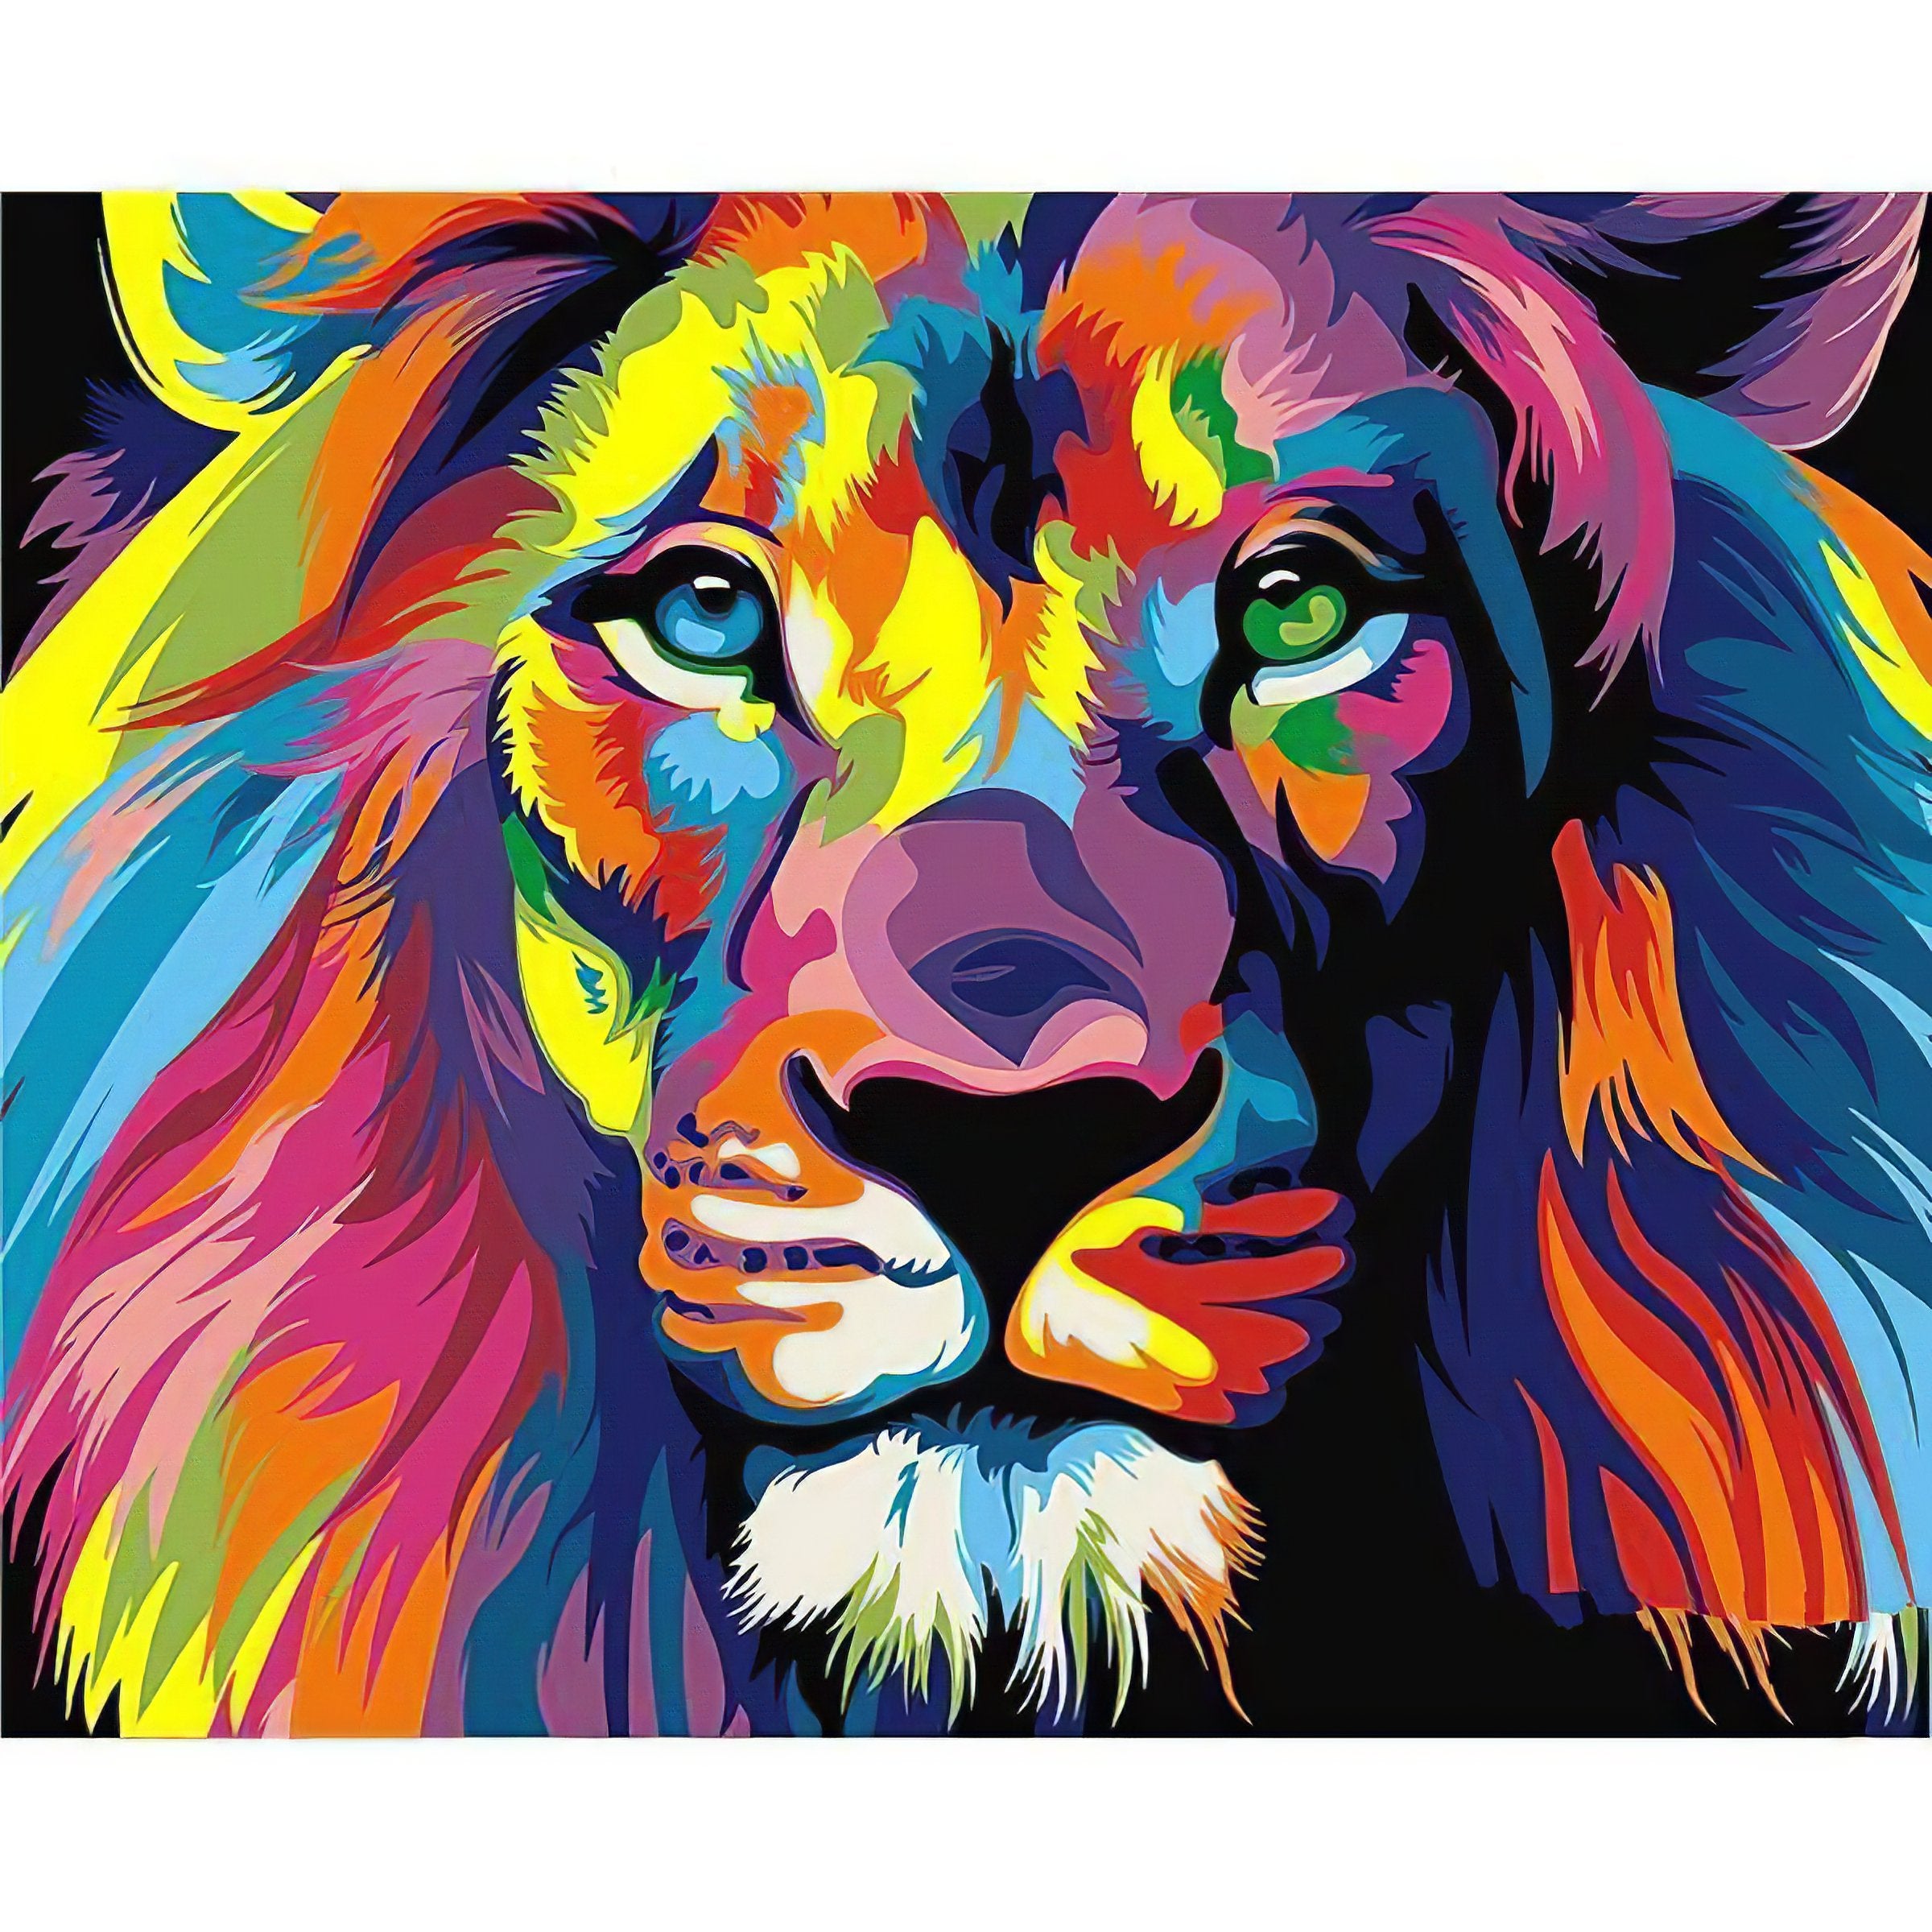 Experience the awe of a colored lion, radiating strength and vibrancy.Colored Lion - Diamondartlove